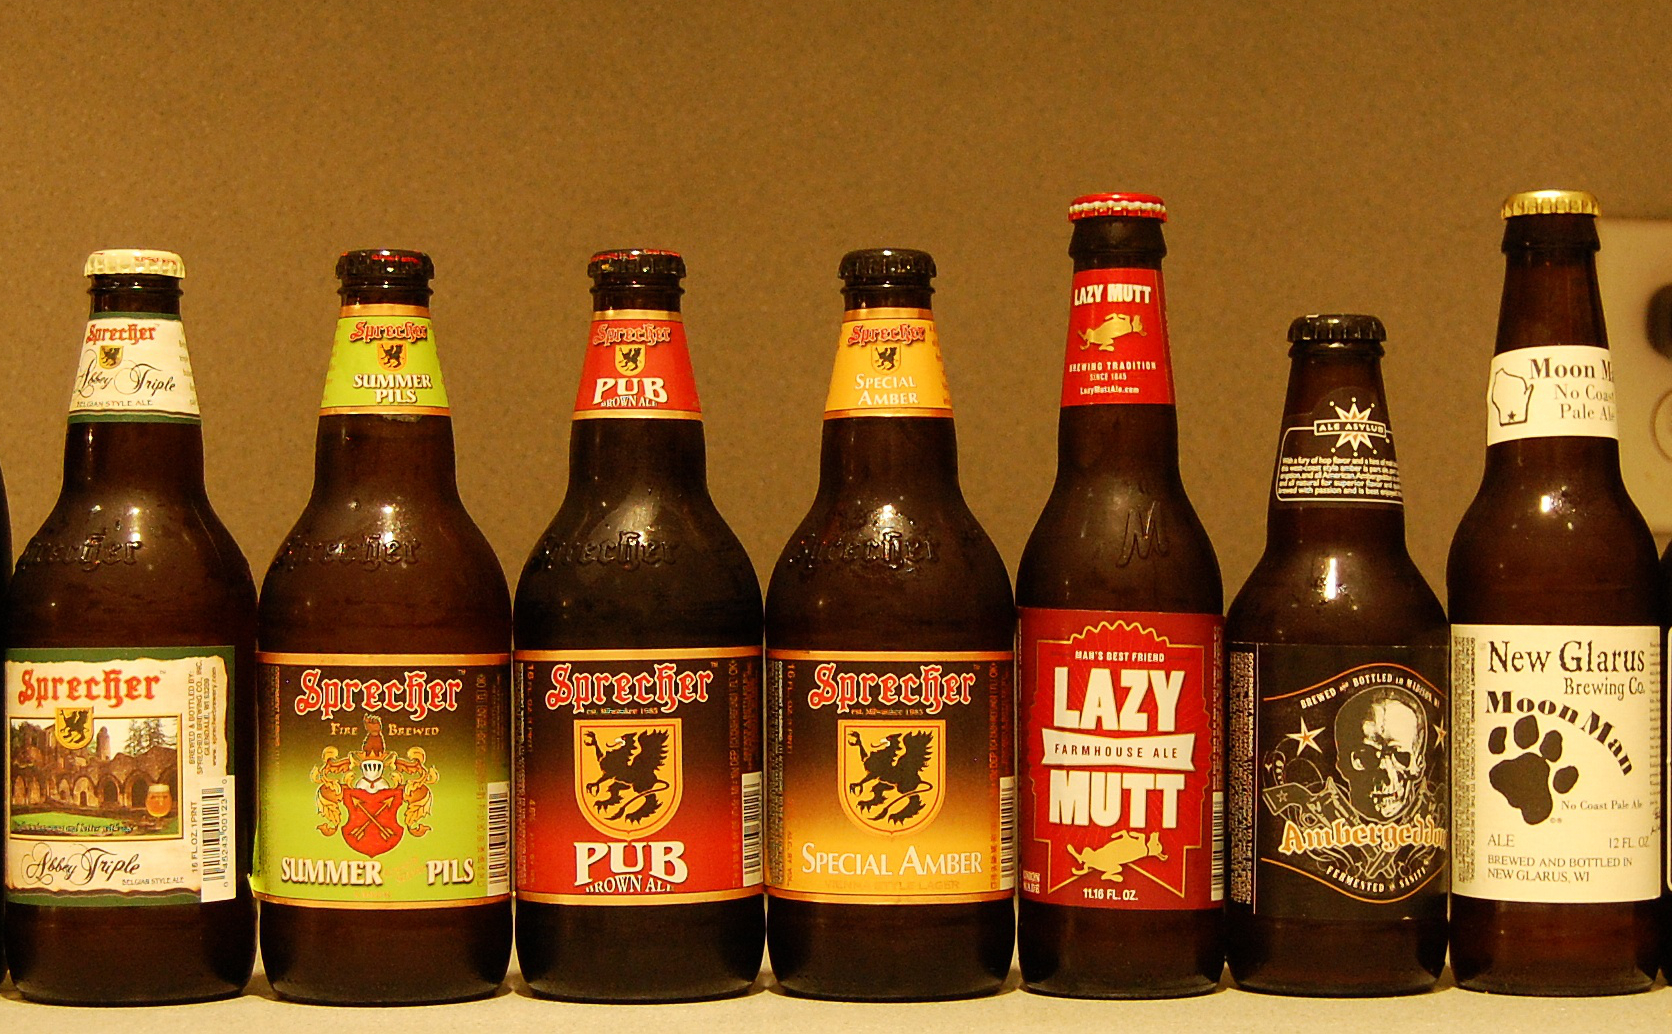 Could Wisconsin Ever Have Too Many Craft Beers?